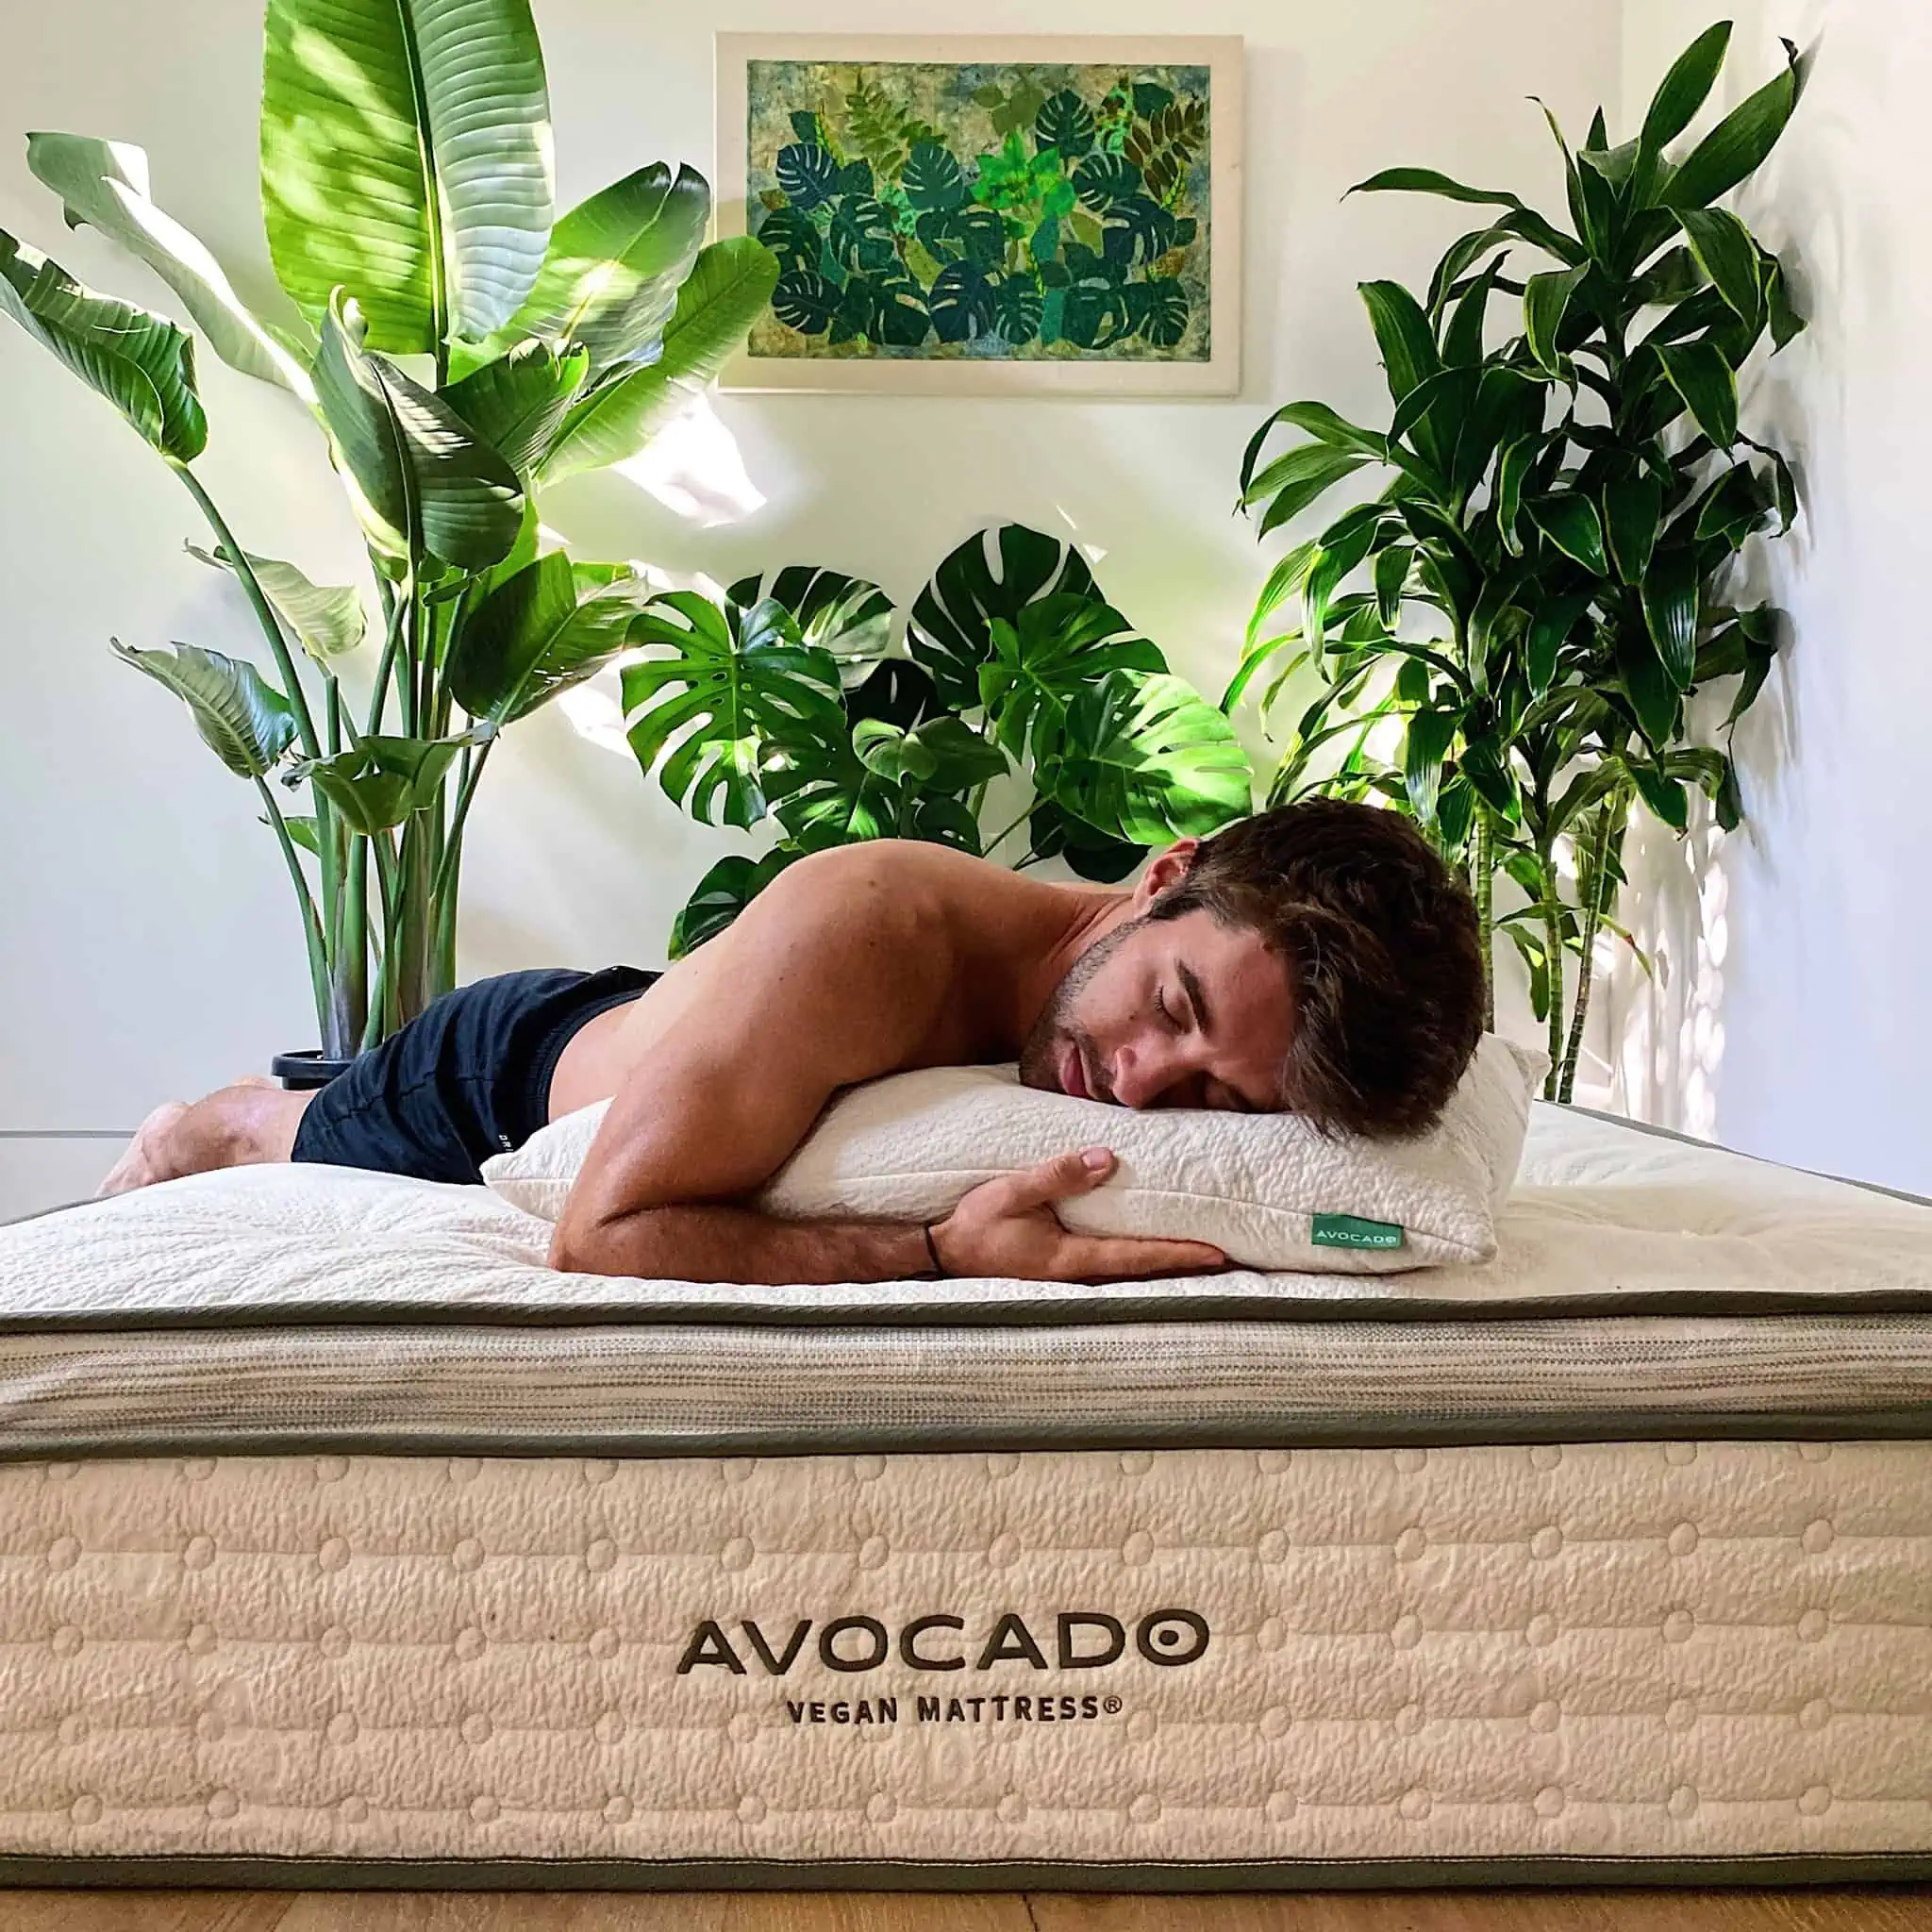 Farmer Nick hugging a cozy pillow on an Avocado vegan mattress with plants in the background.